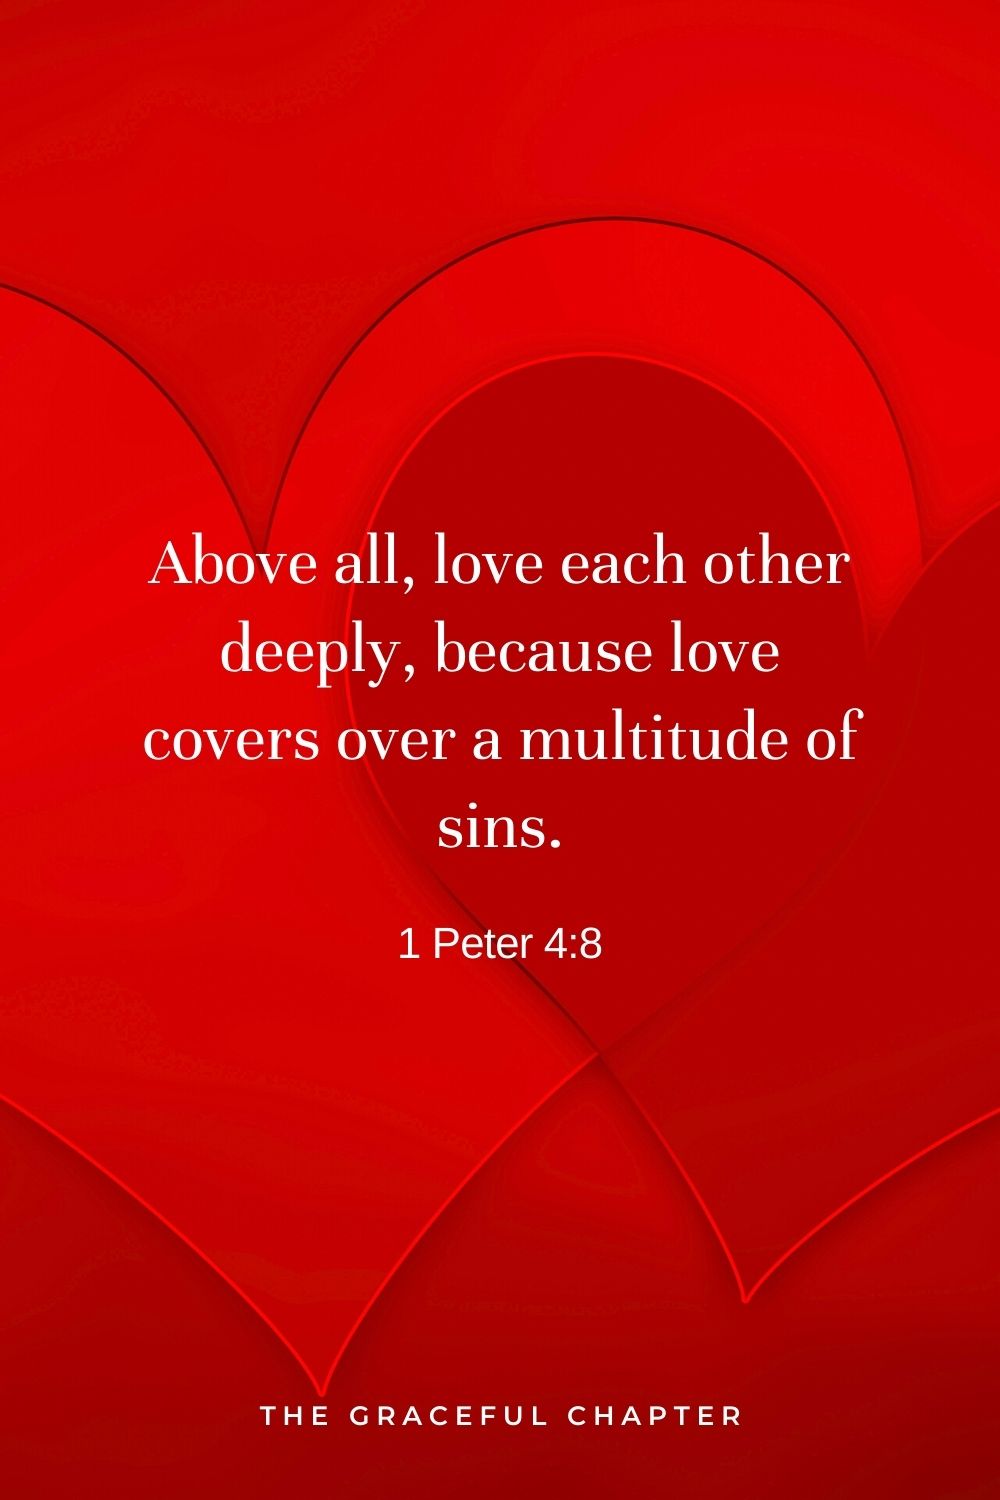 Above all, love each other deeply, because love covers over a multitude of sins. 1 Peter 4:8